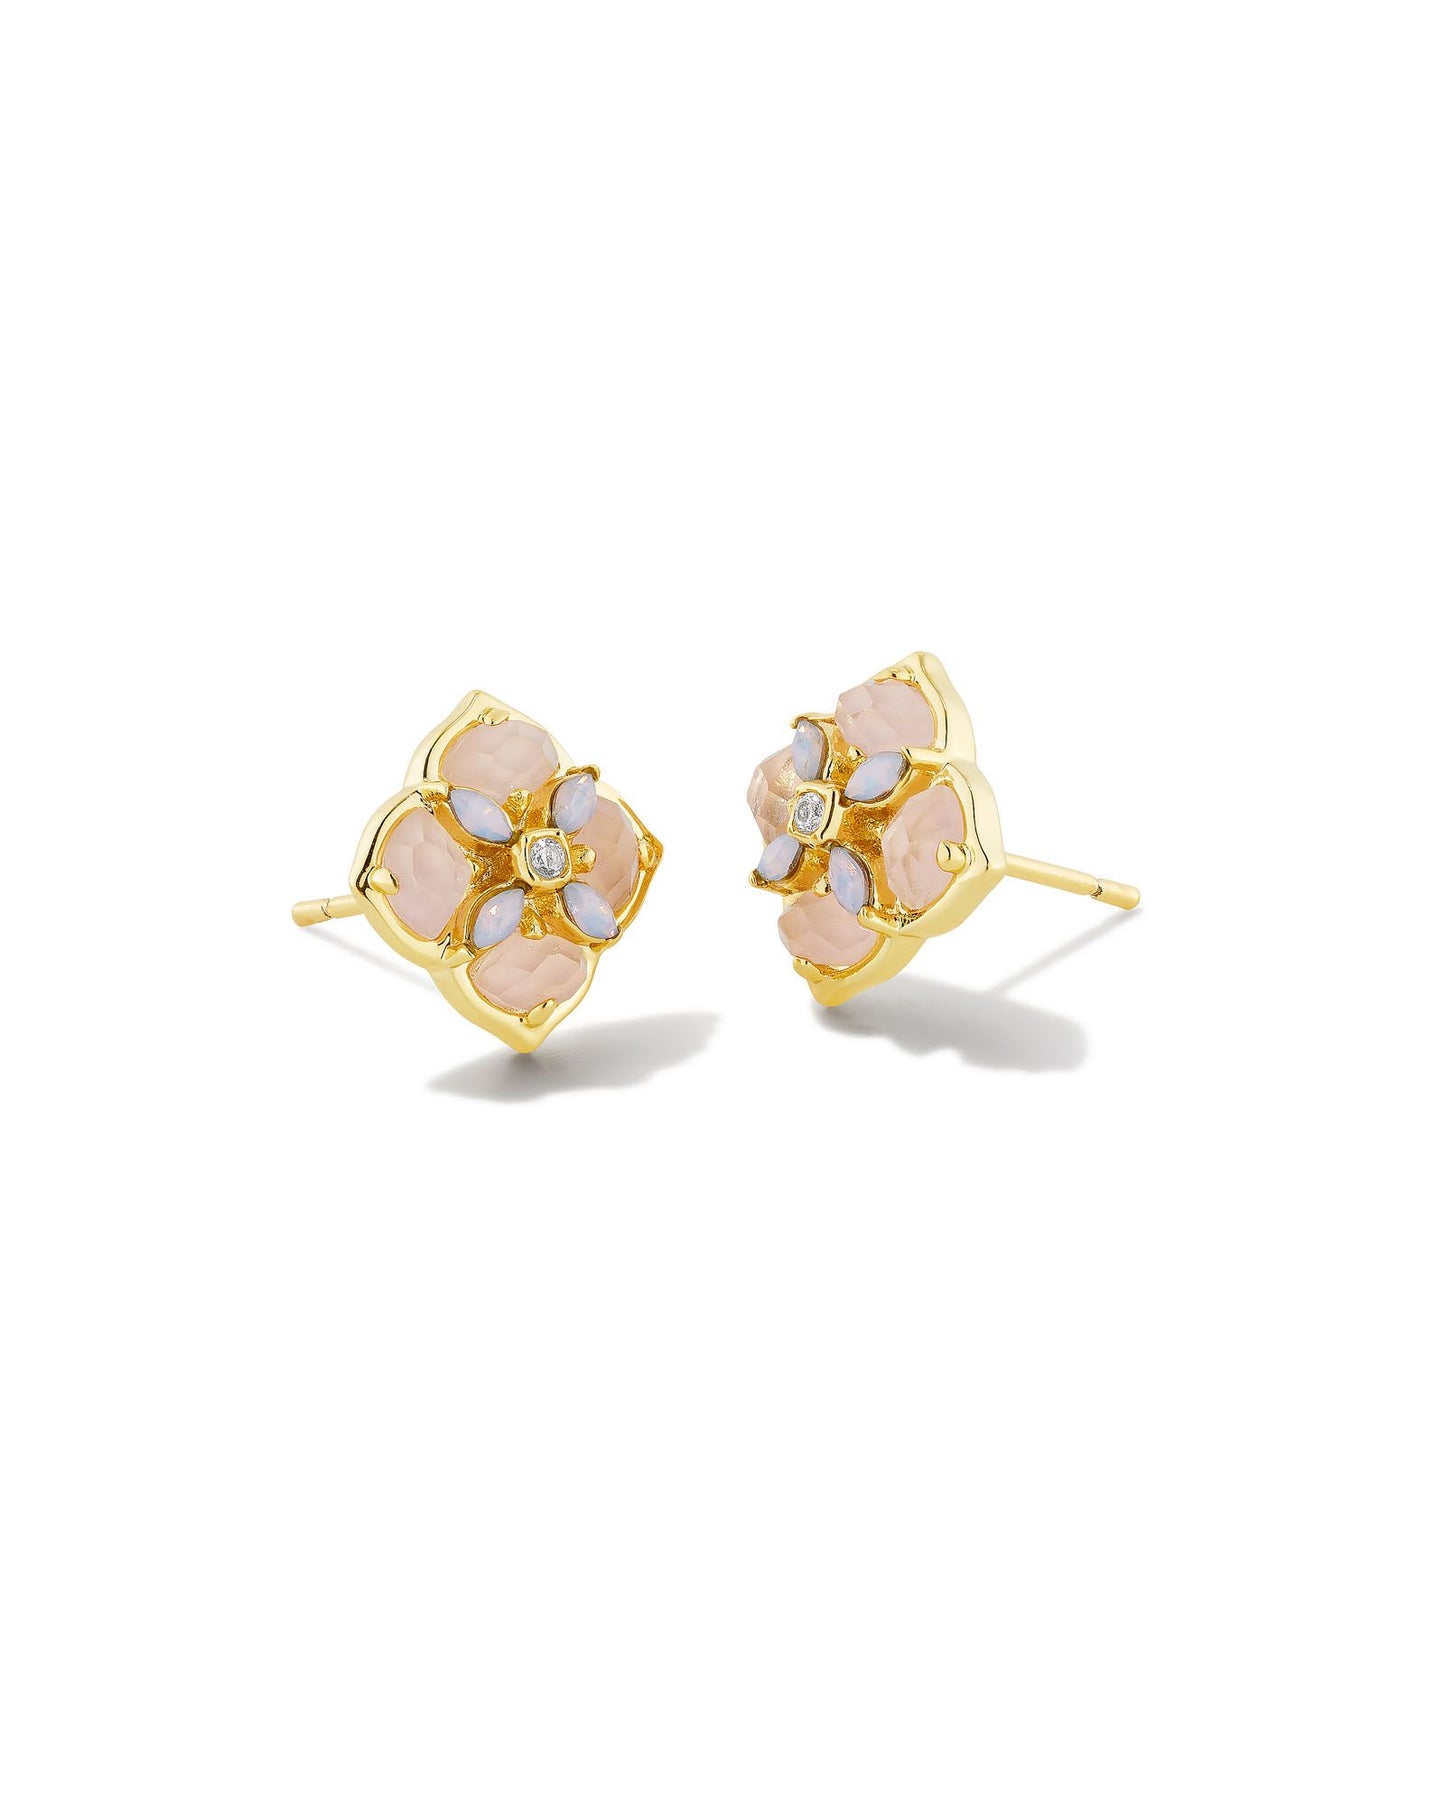 These stud earrings feature subtle stones and gems filled into our logo shape that are sure to lighten up any ensemble. The metal is 24k gold plated over brass with rose mother of pearl stones. 